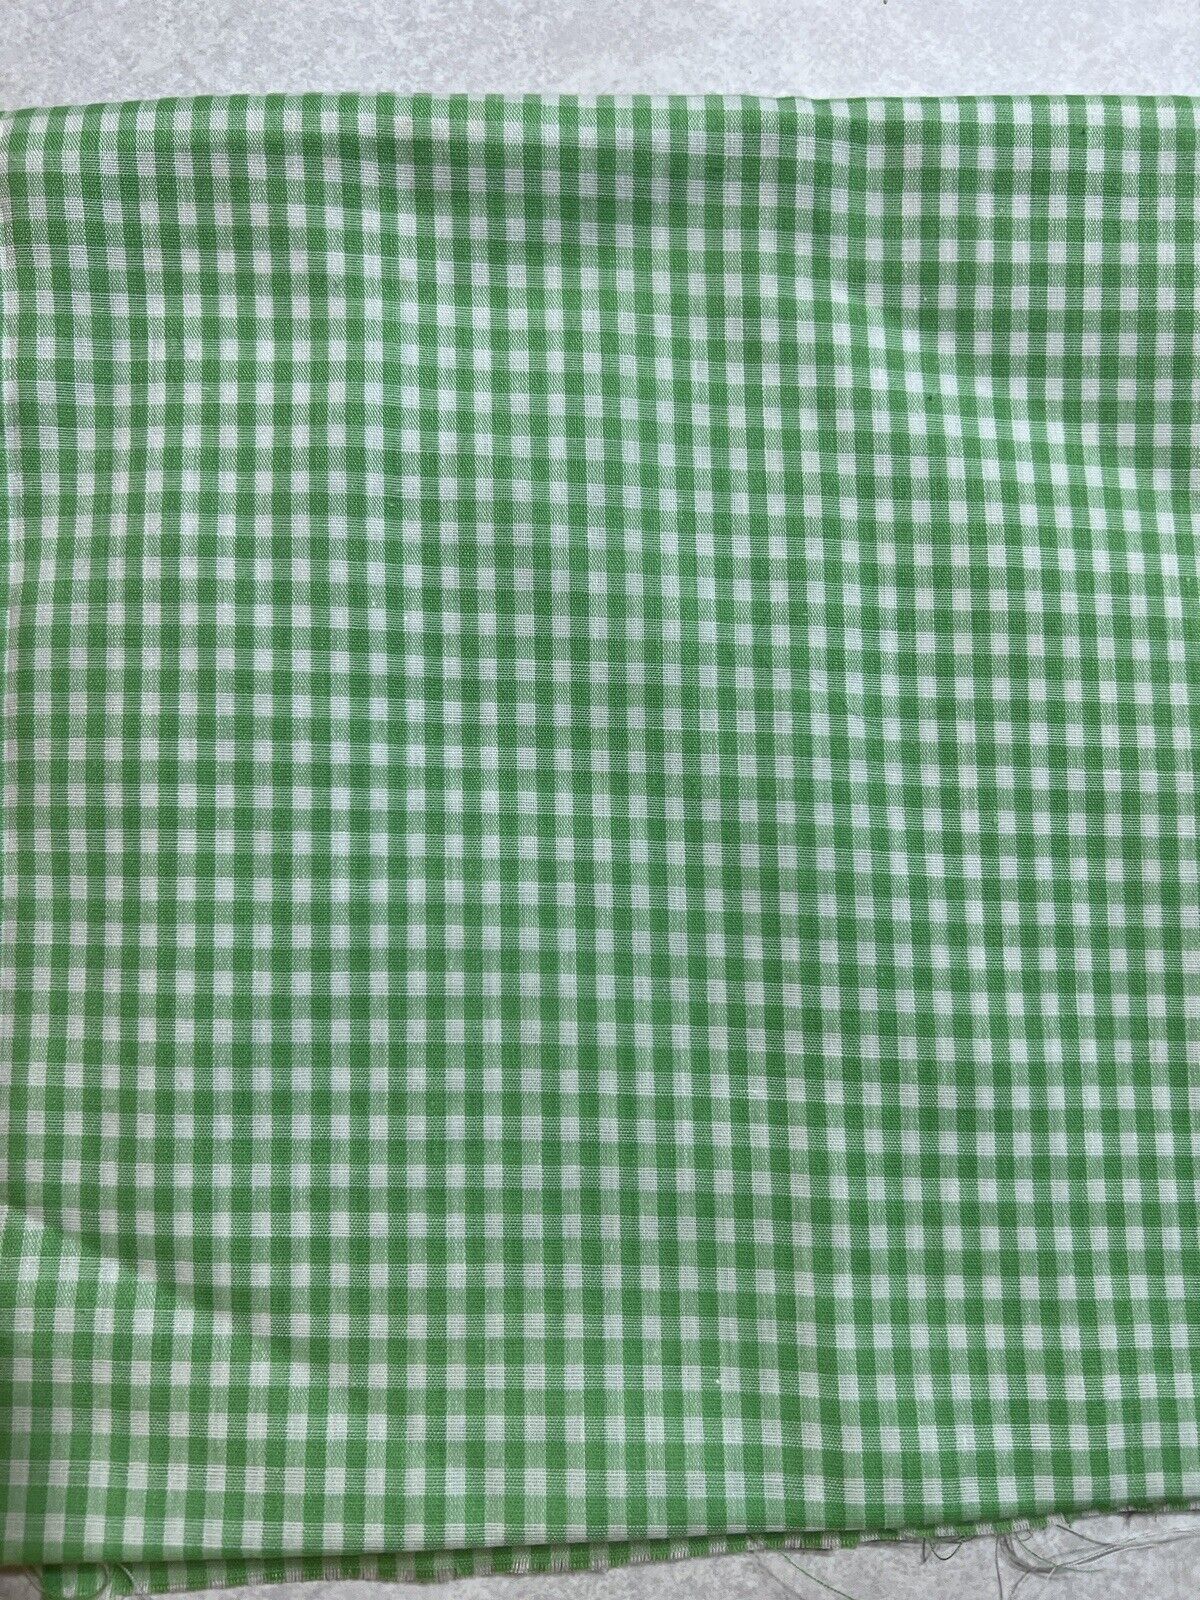 Vintage Cotton Fabric Gingham Check Light Green 1/8” Block 1 yard X 41 Inches